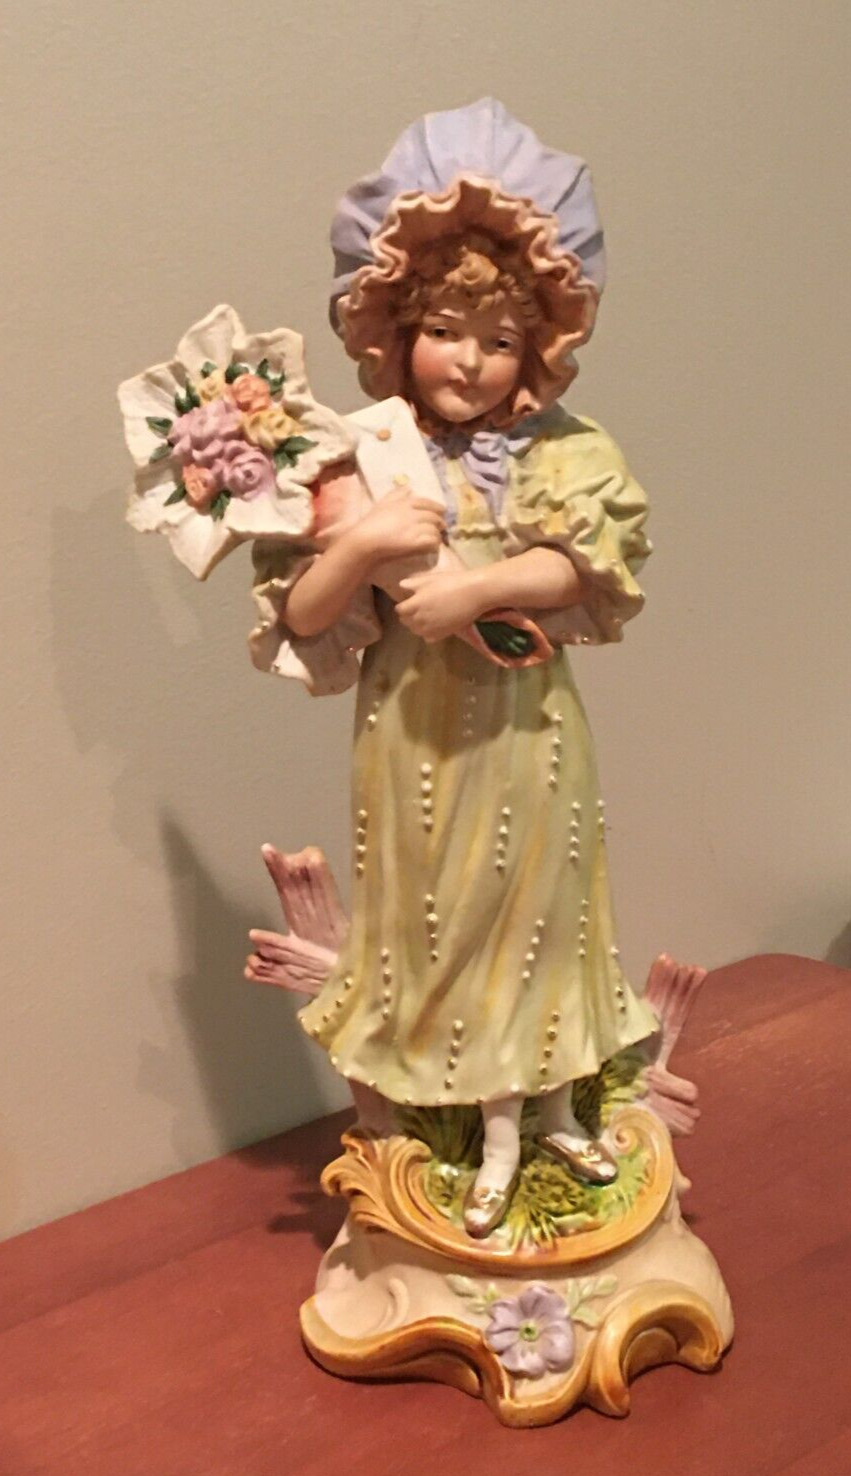 Antique Bisque Gebruder Heubach Style Girl Holding Flowers Figure Rare 14”